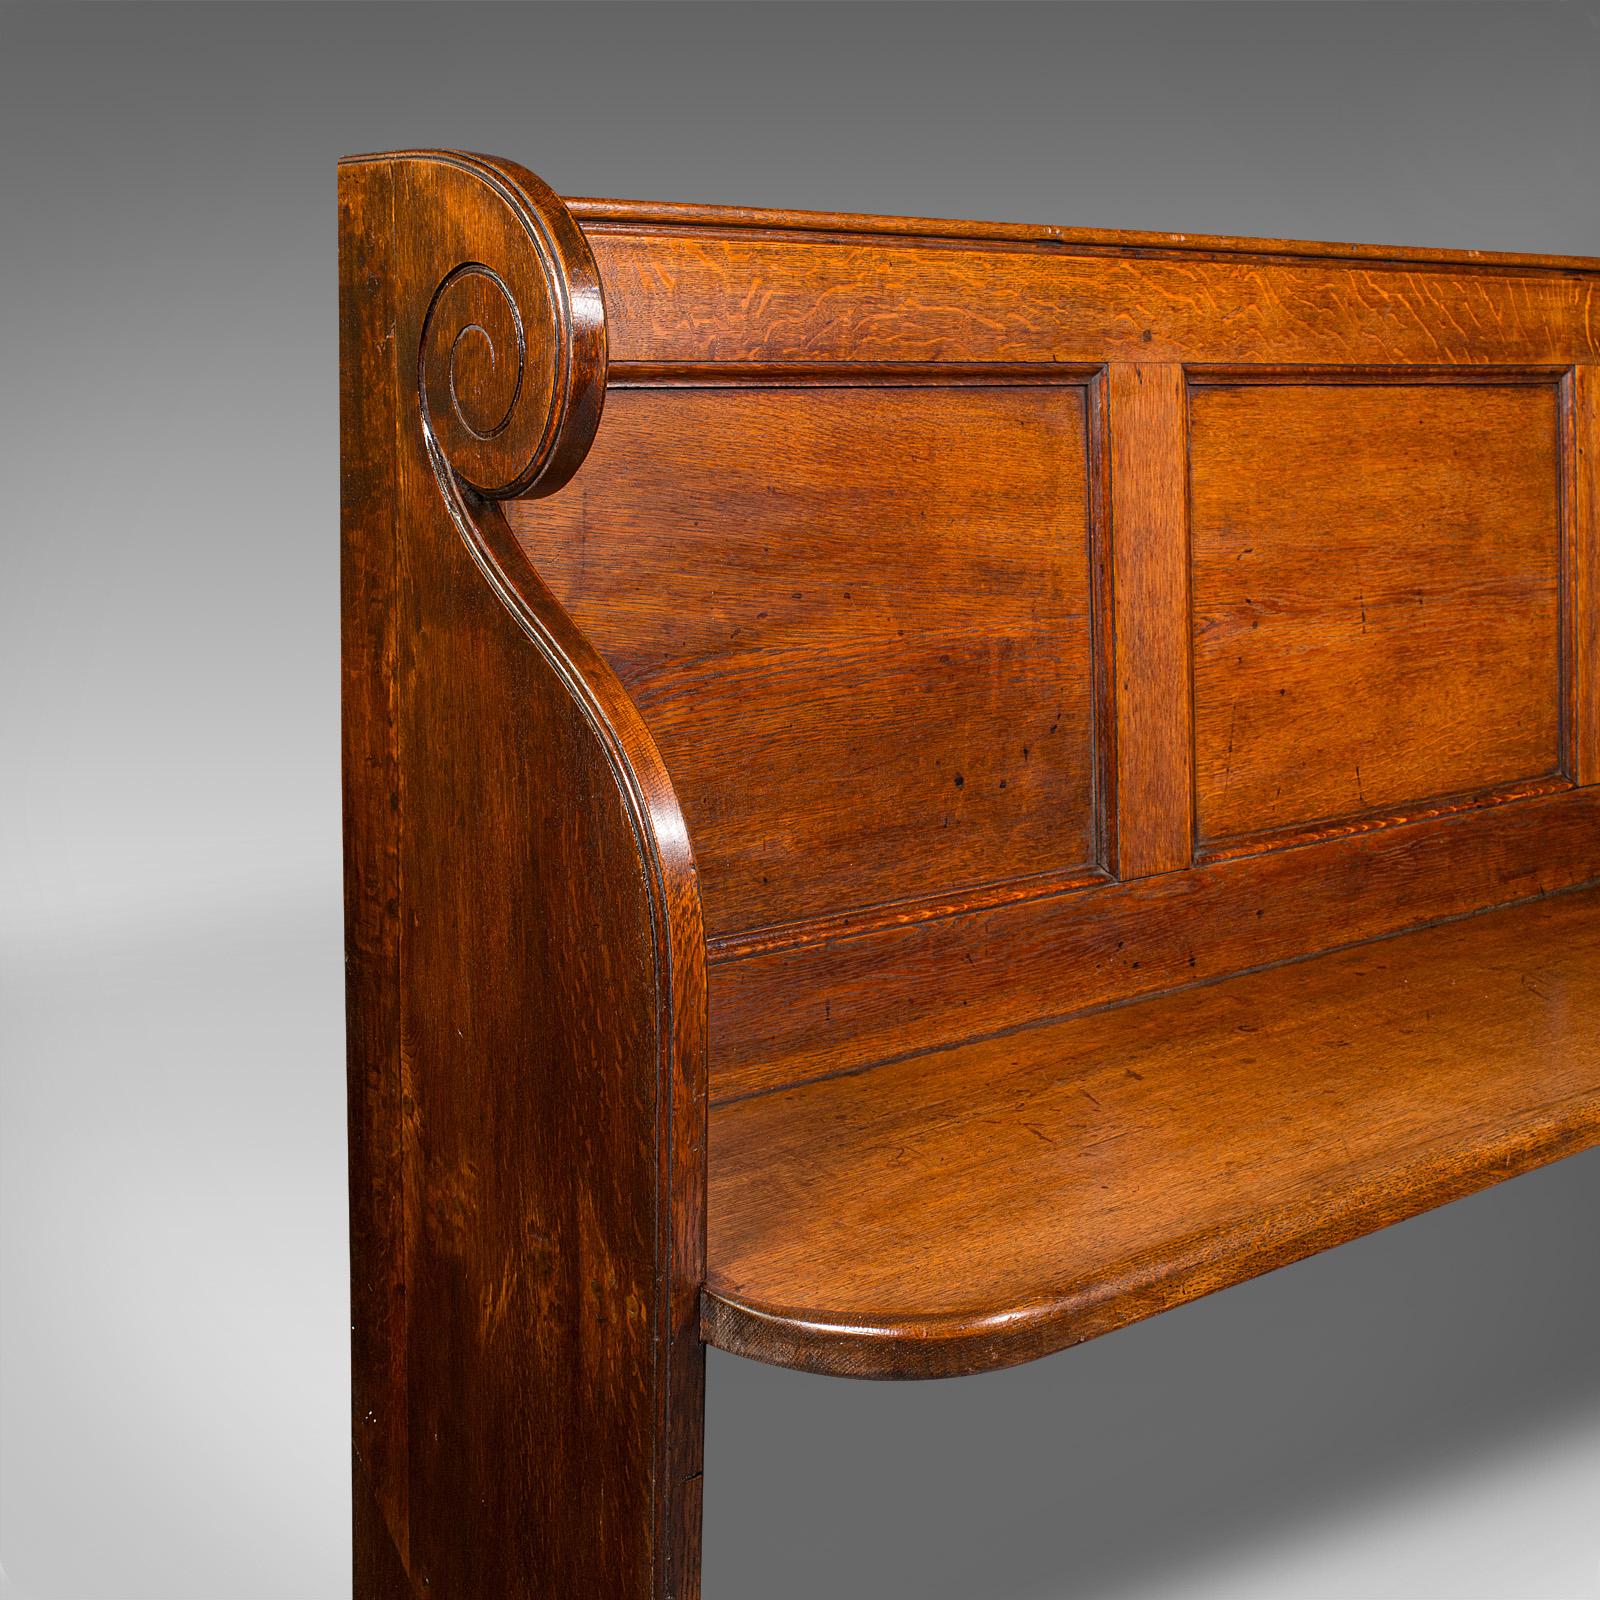 Antique Panelled Church Pew, English, Oak Bench, Ecclesiastic, Victorian, C.1850 For Sale 2